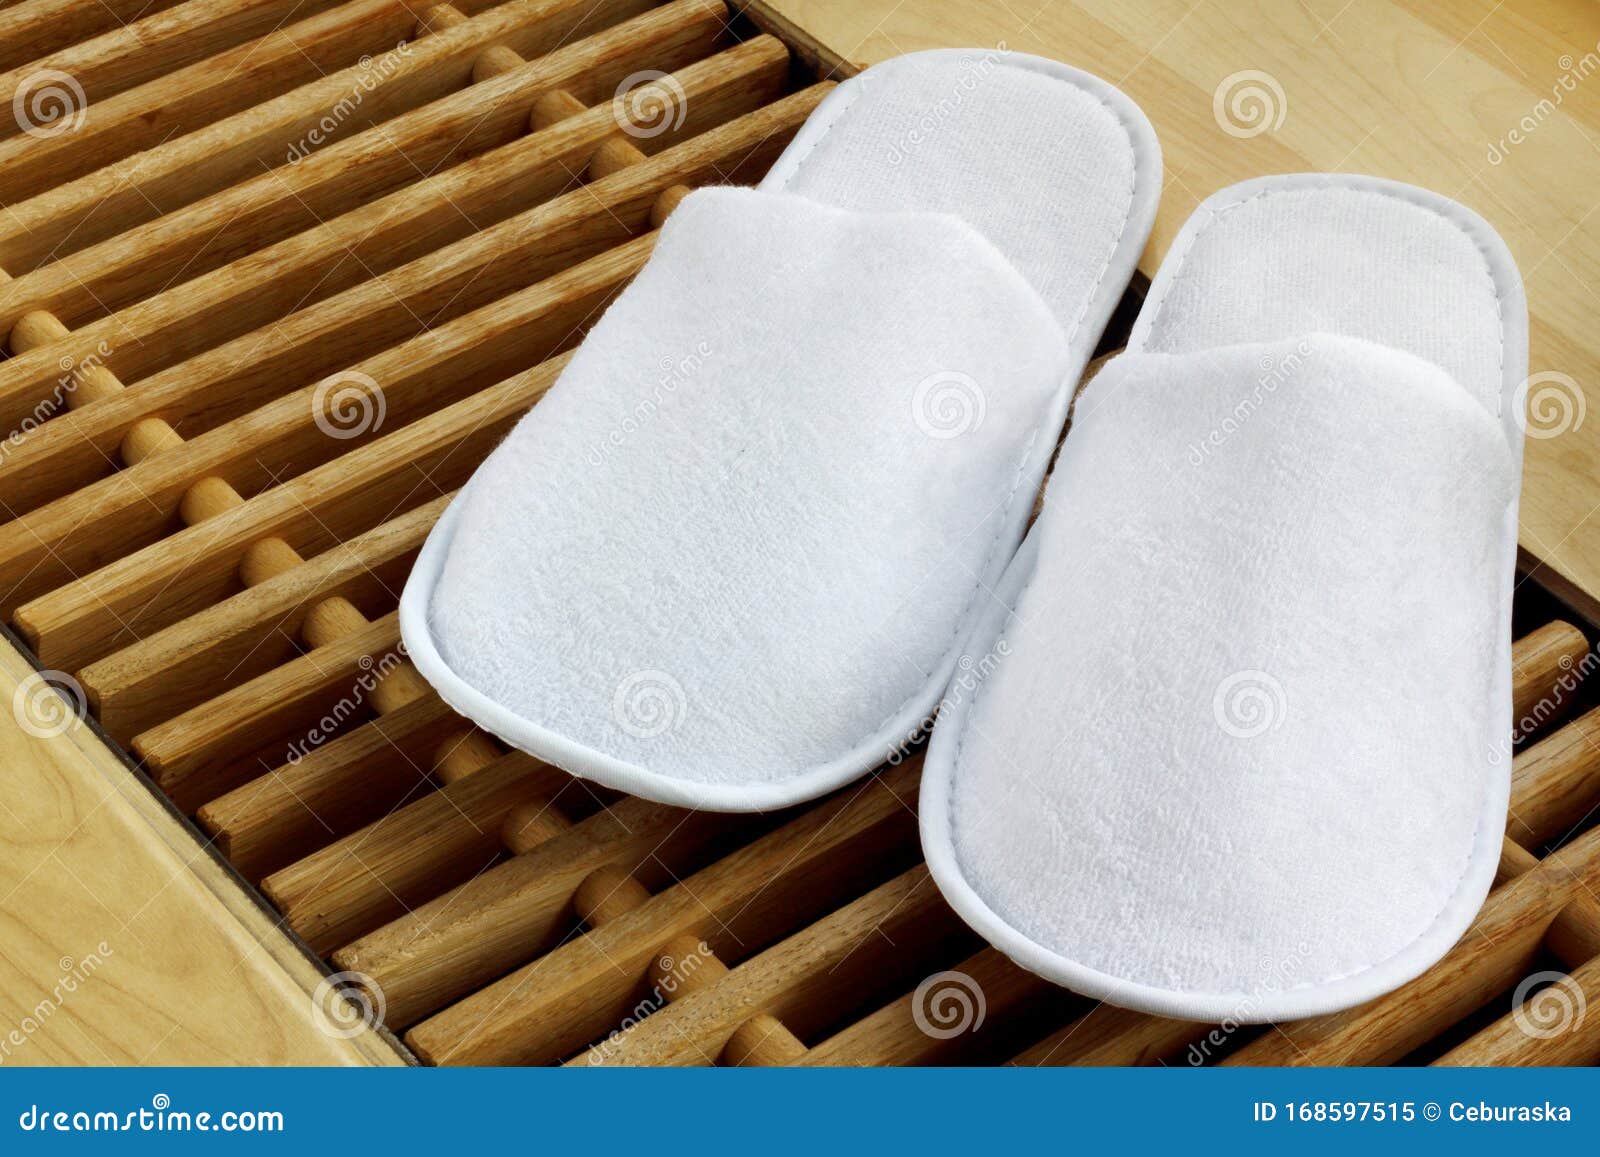 Pair of White Hotel Spa / Wellness Slippers Stock Image - Image of blue, 168597515